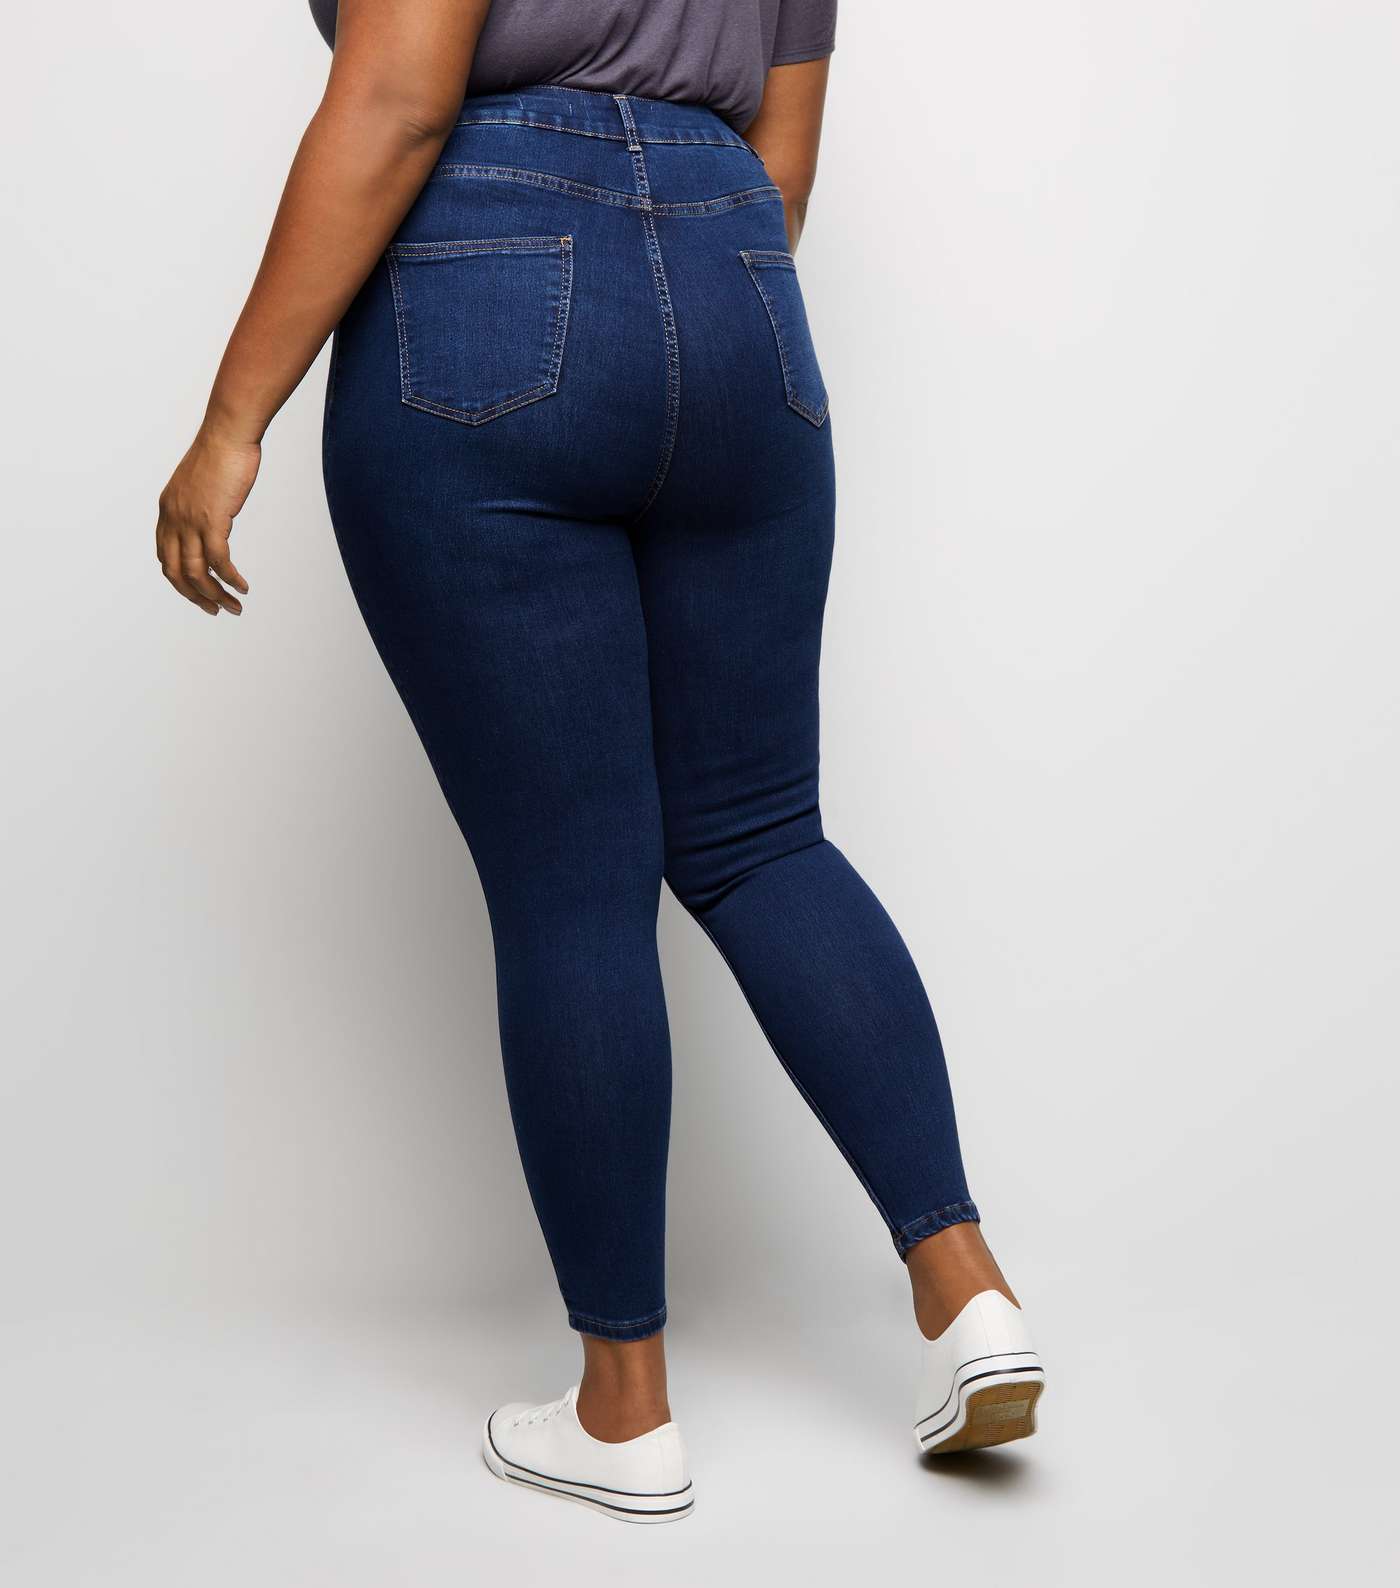 Curves Blue Ripped High Waist Super Skinny Jeans Image 3